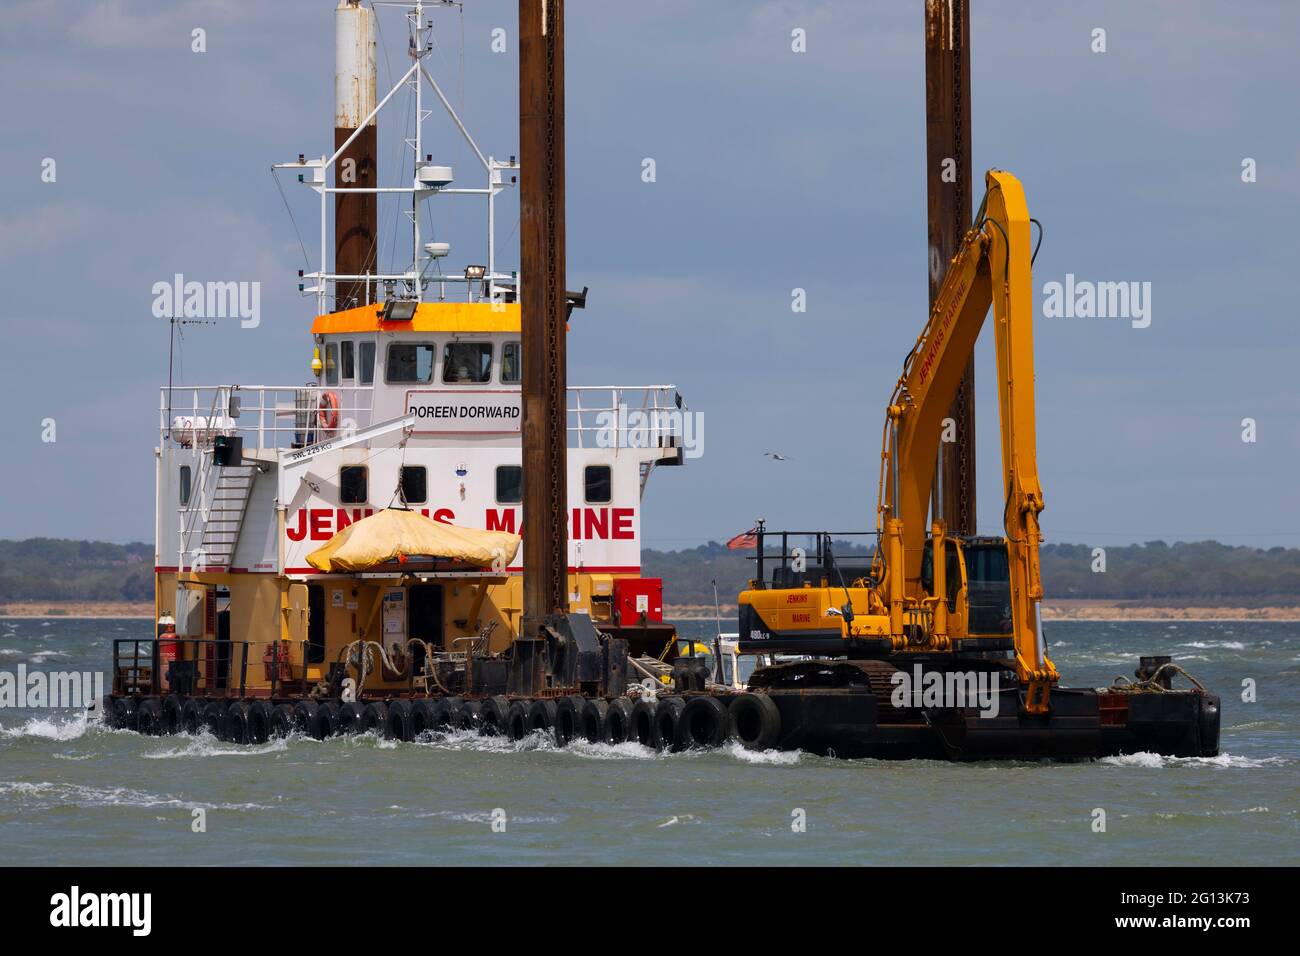 dredger,barge,JCB,long,arm,deep, The Solent, Cowes, isle of Wight, England, UK, Stock Photo